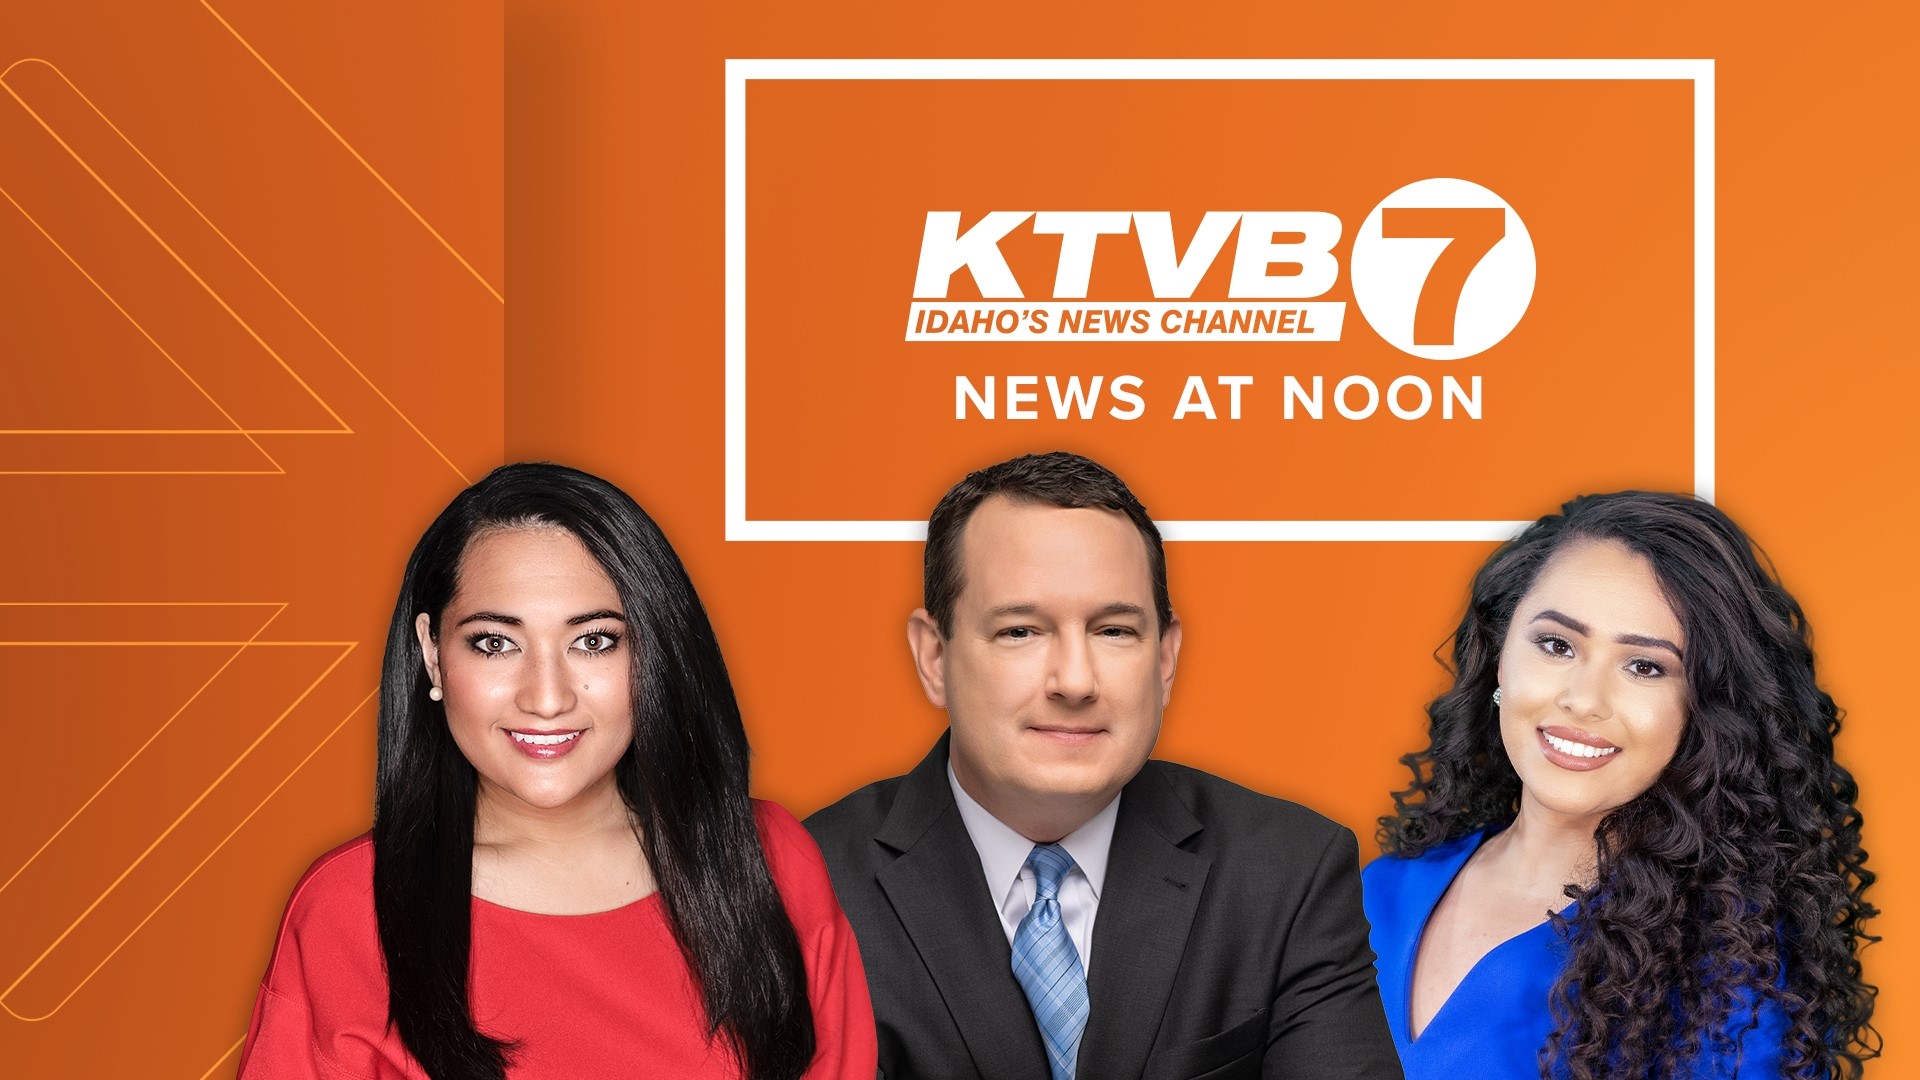 Watch the KTVB News at Noon for local weather from a certified meteorologist and the day’s local, regional and national news.
